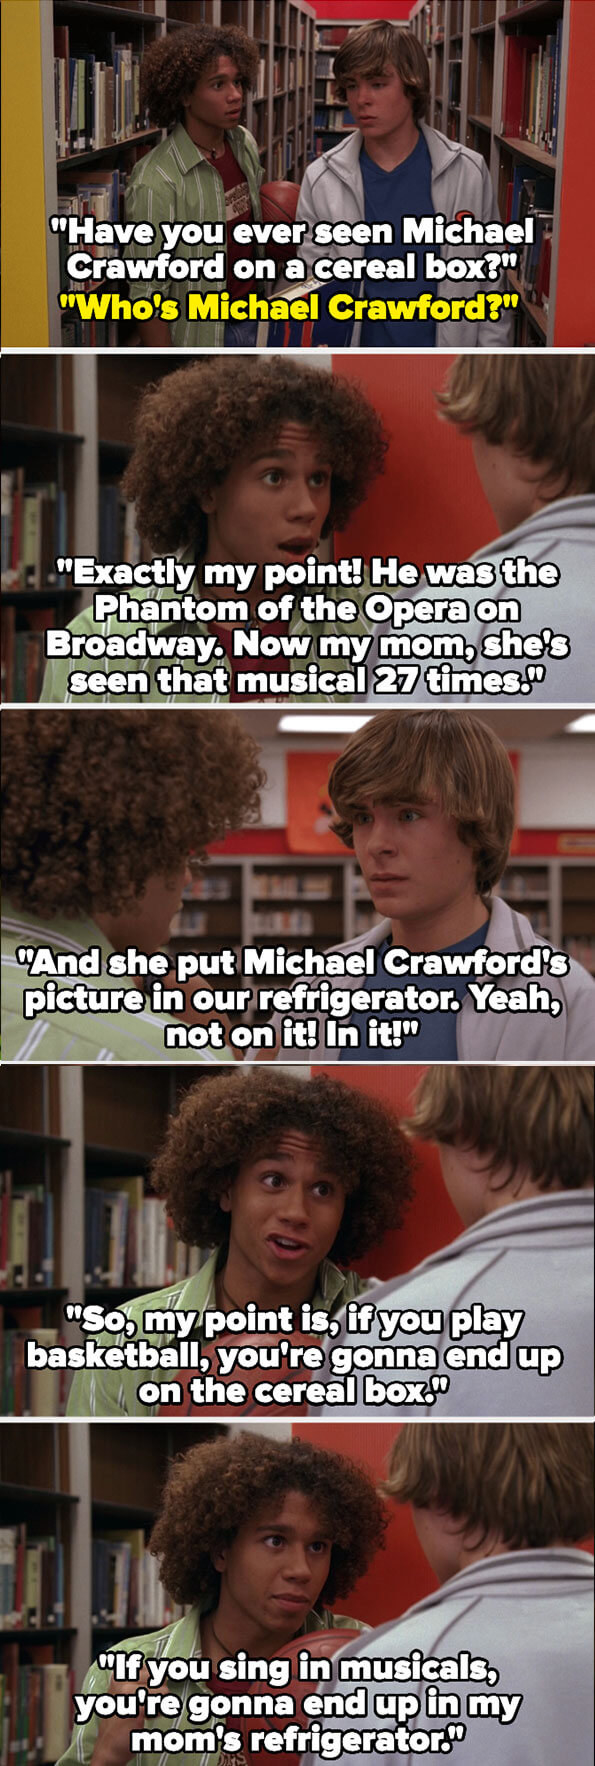 Chad saying that sports players end up on cereal boxes and musical stars end up in his mom&#x27;s fridge, explaining how his mom keeps a photo of Michael Crawford, who played The Phantom of The Opera, in her fridge